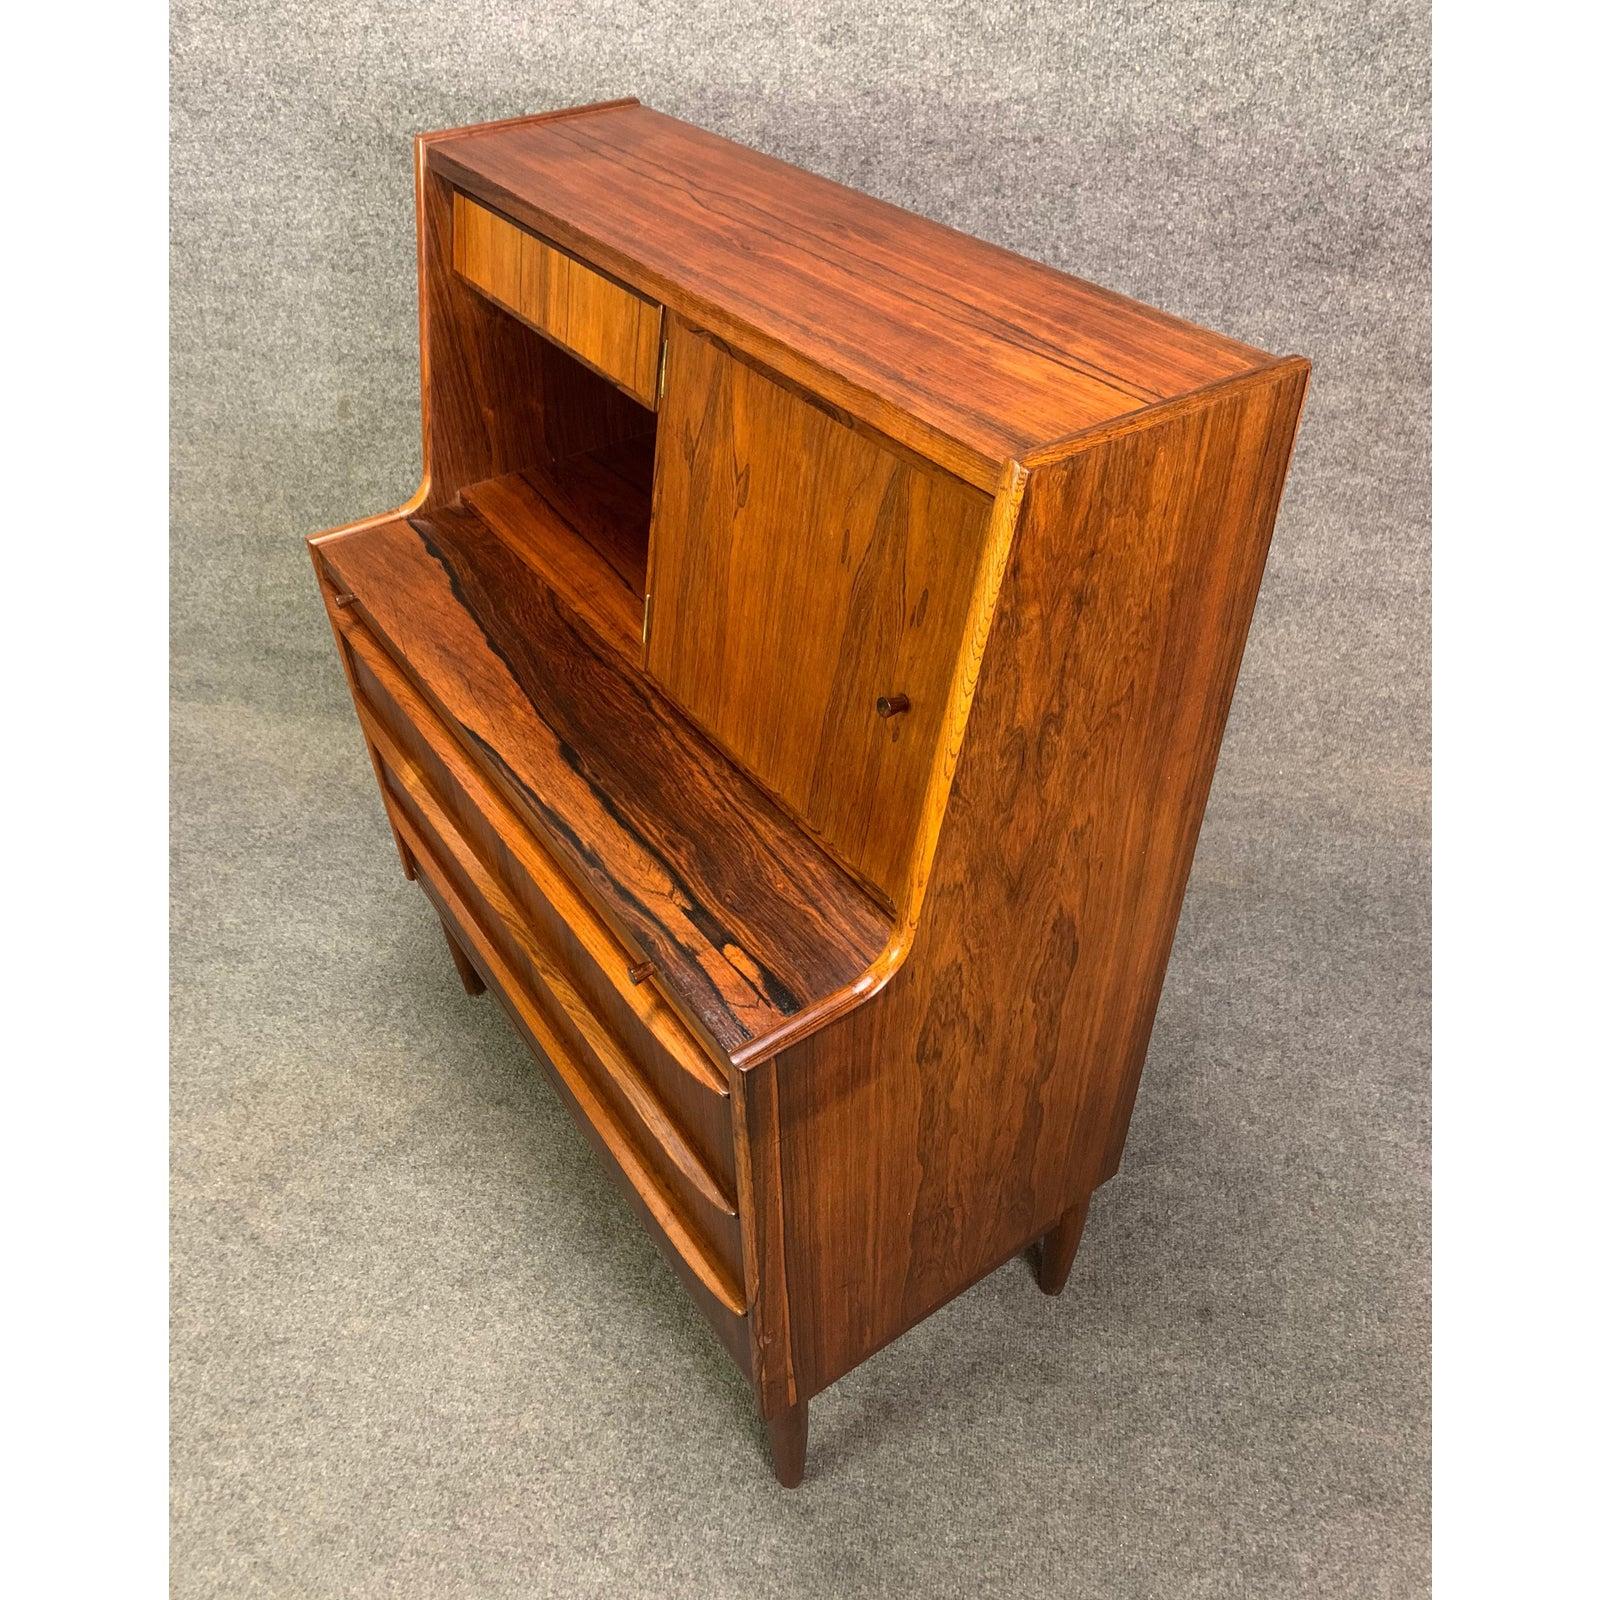 Vintage Danish Mid-Century Modern Rosewood Secretary Desk In Good Condition For Sale In San Marcos, CA